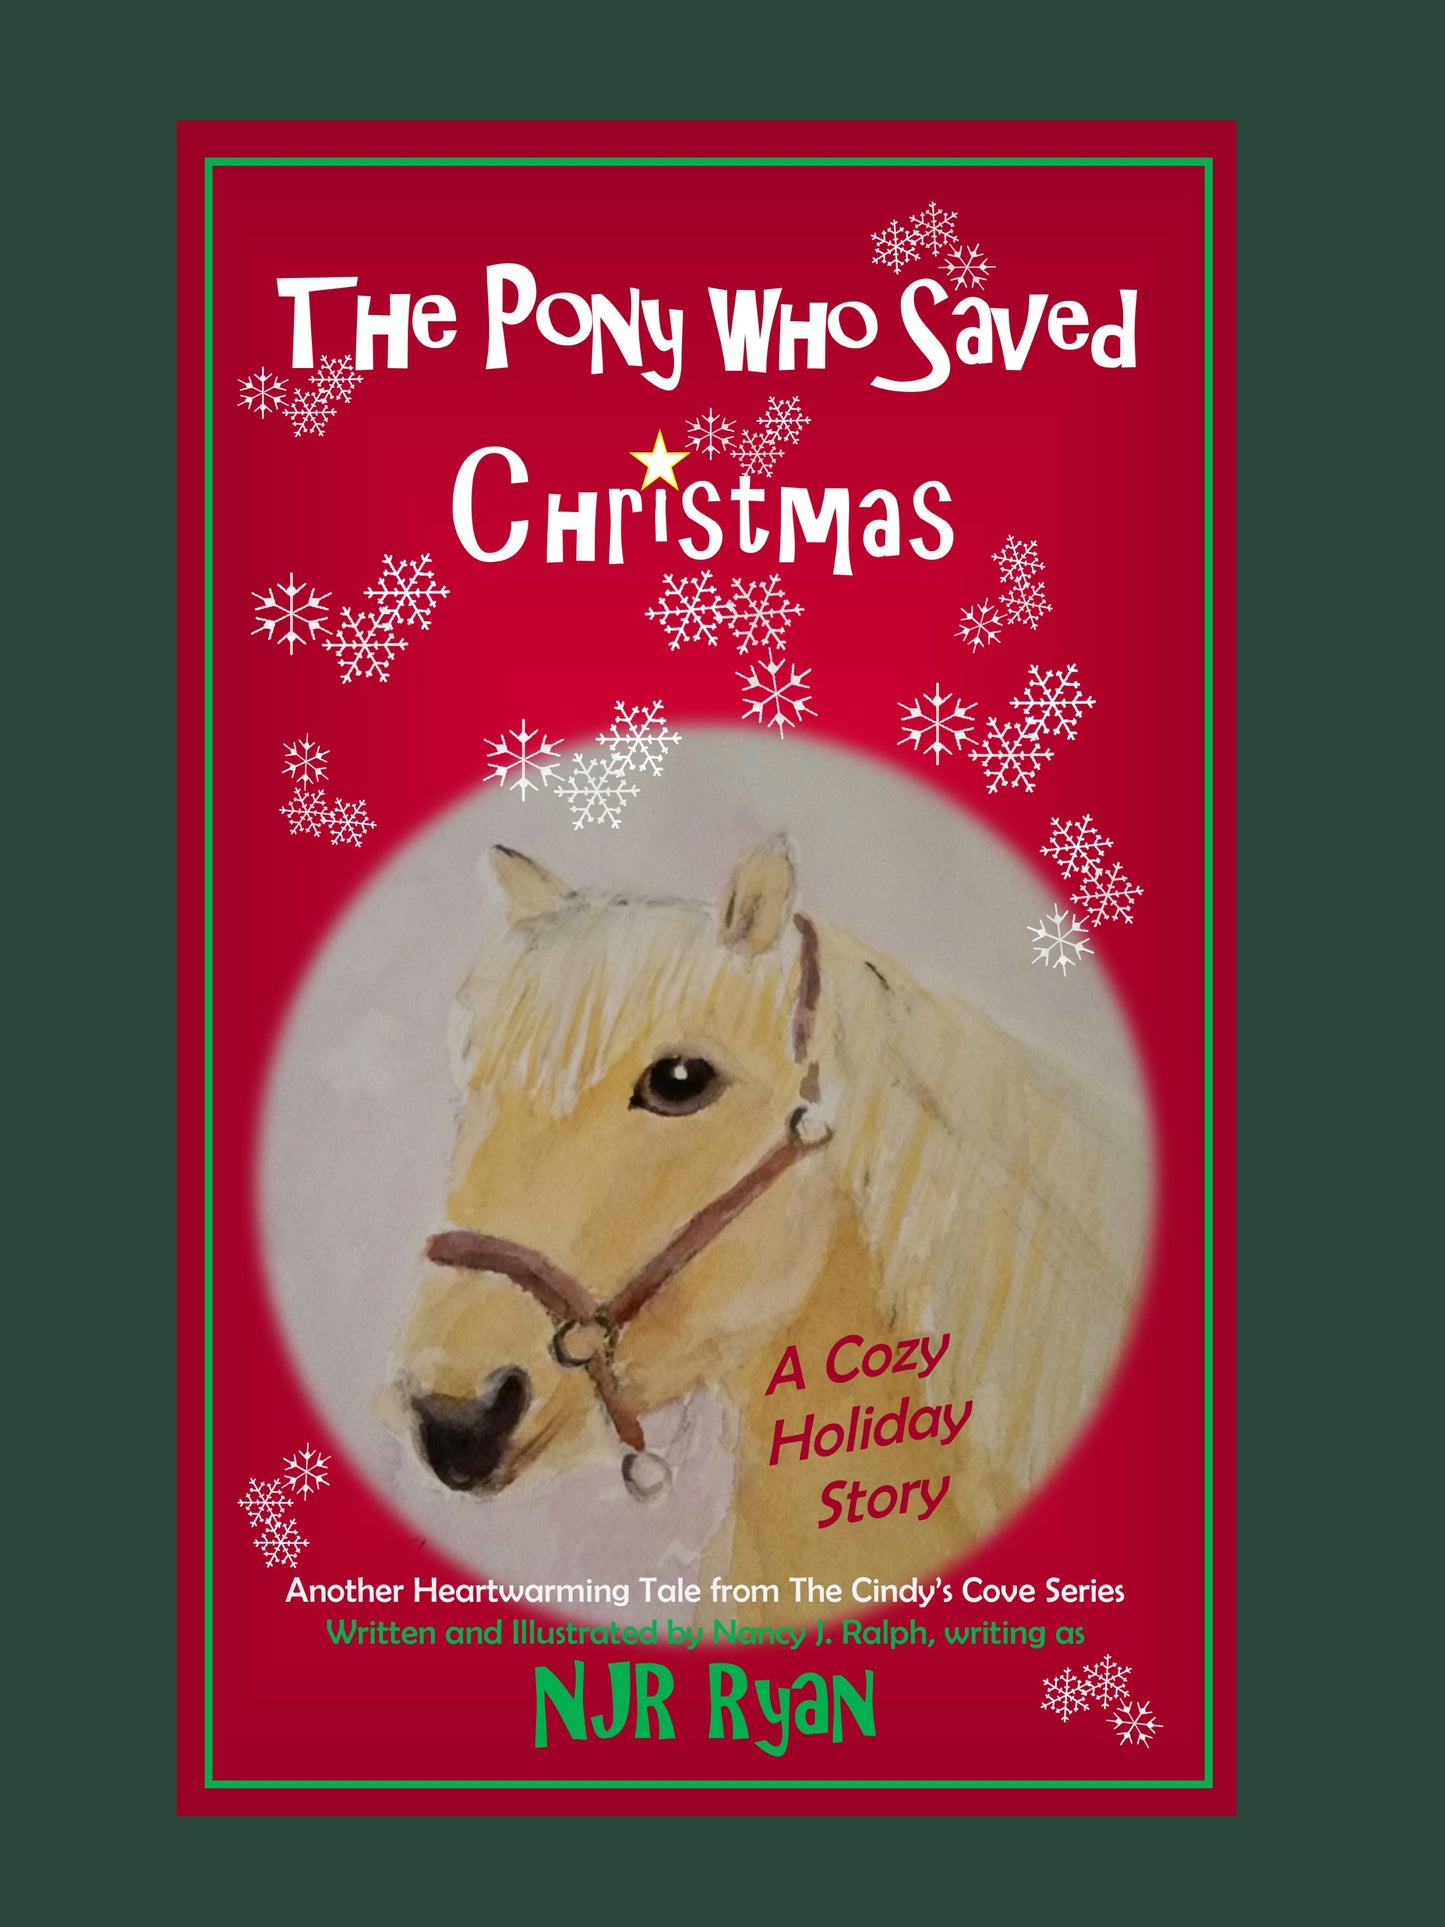 The Christmas Pony – Can a child's beloved pony come to the rescue?